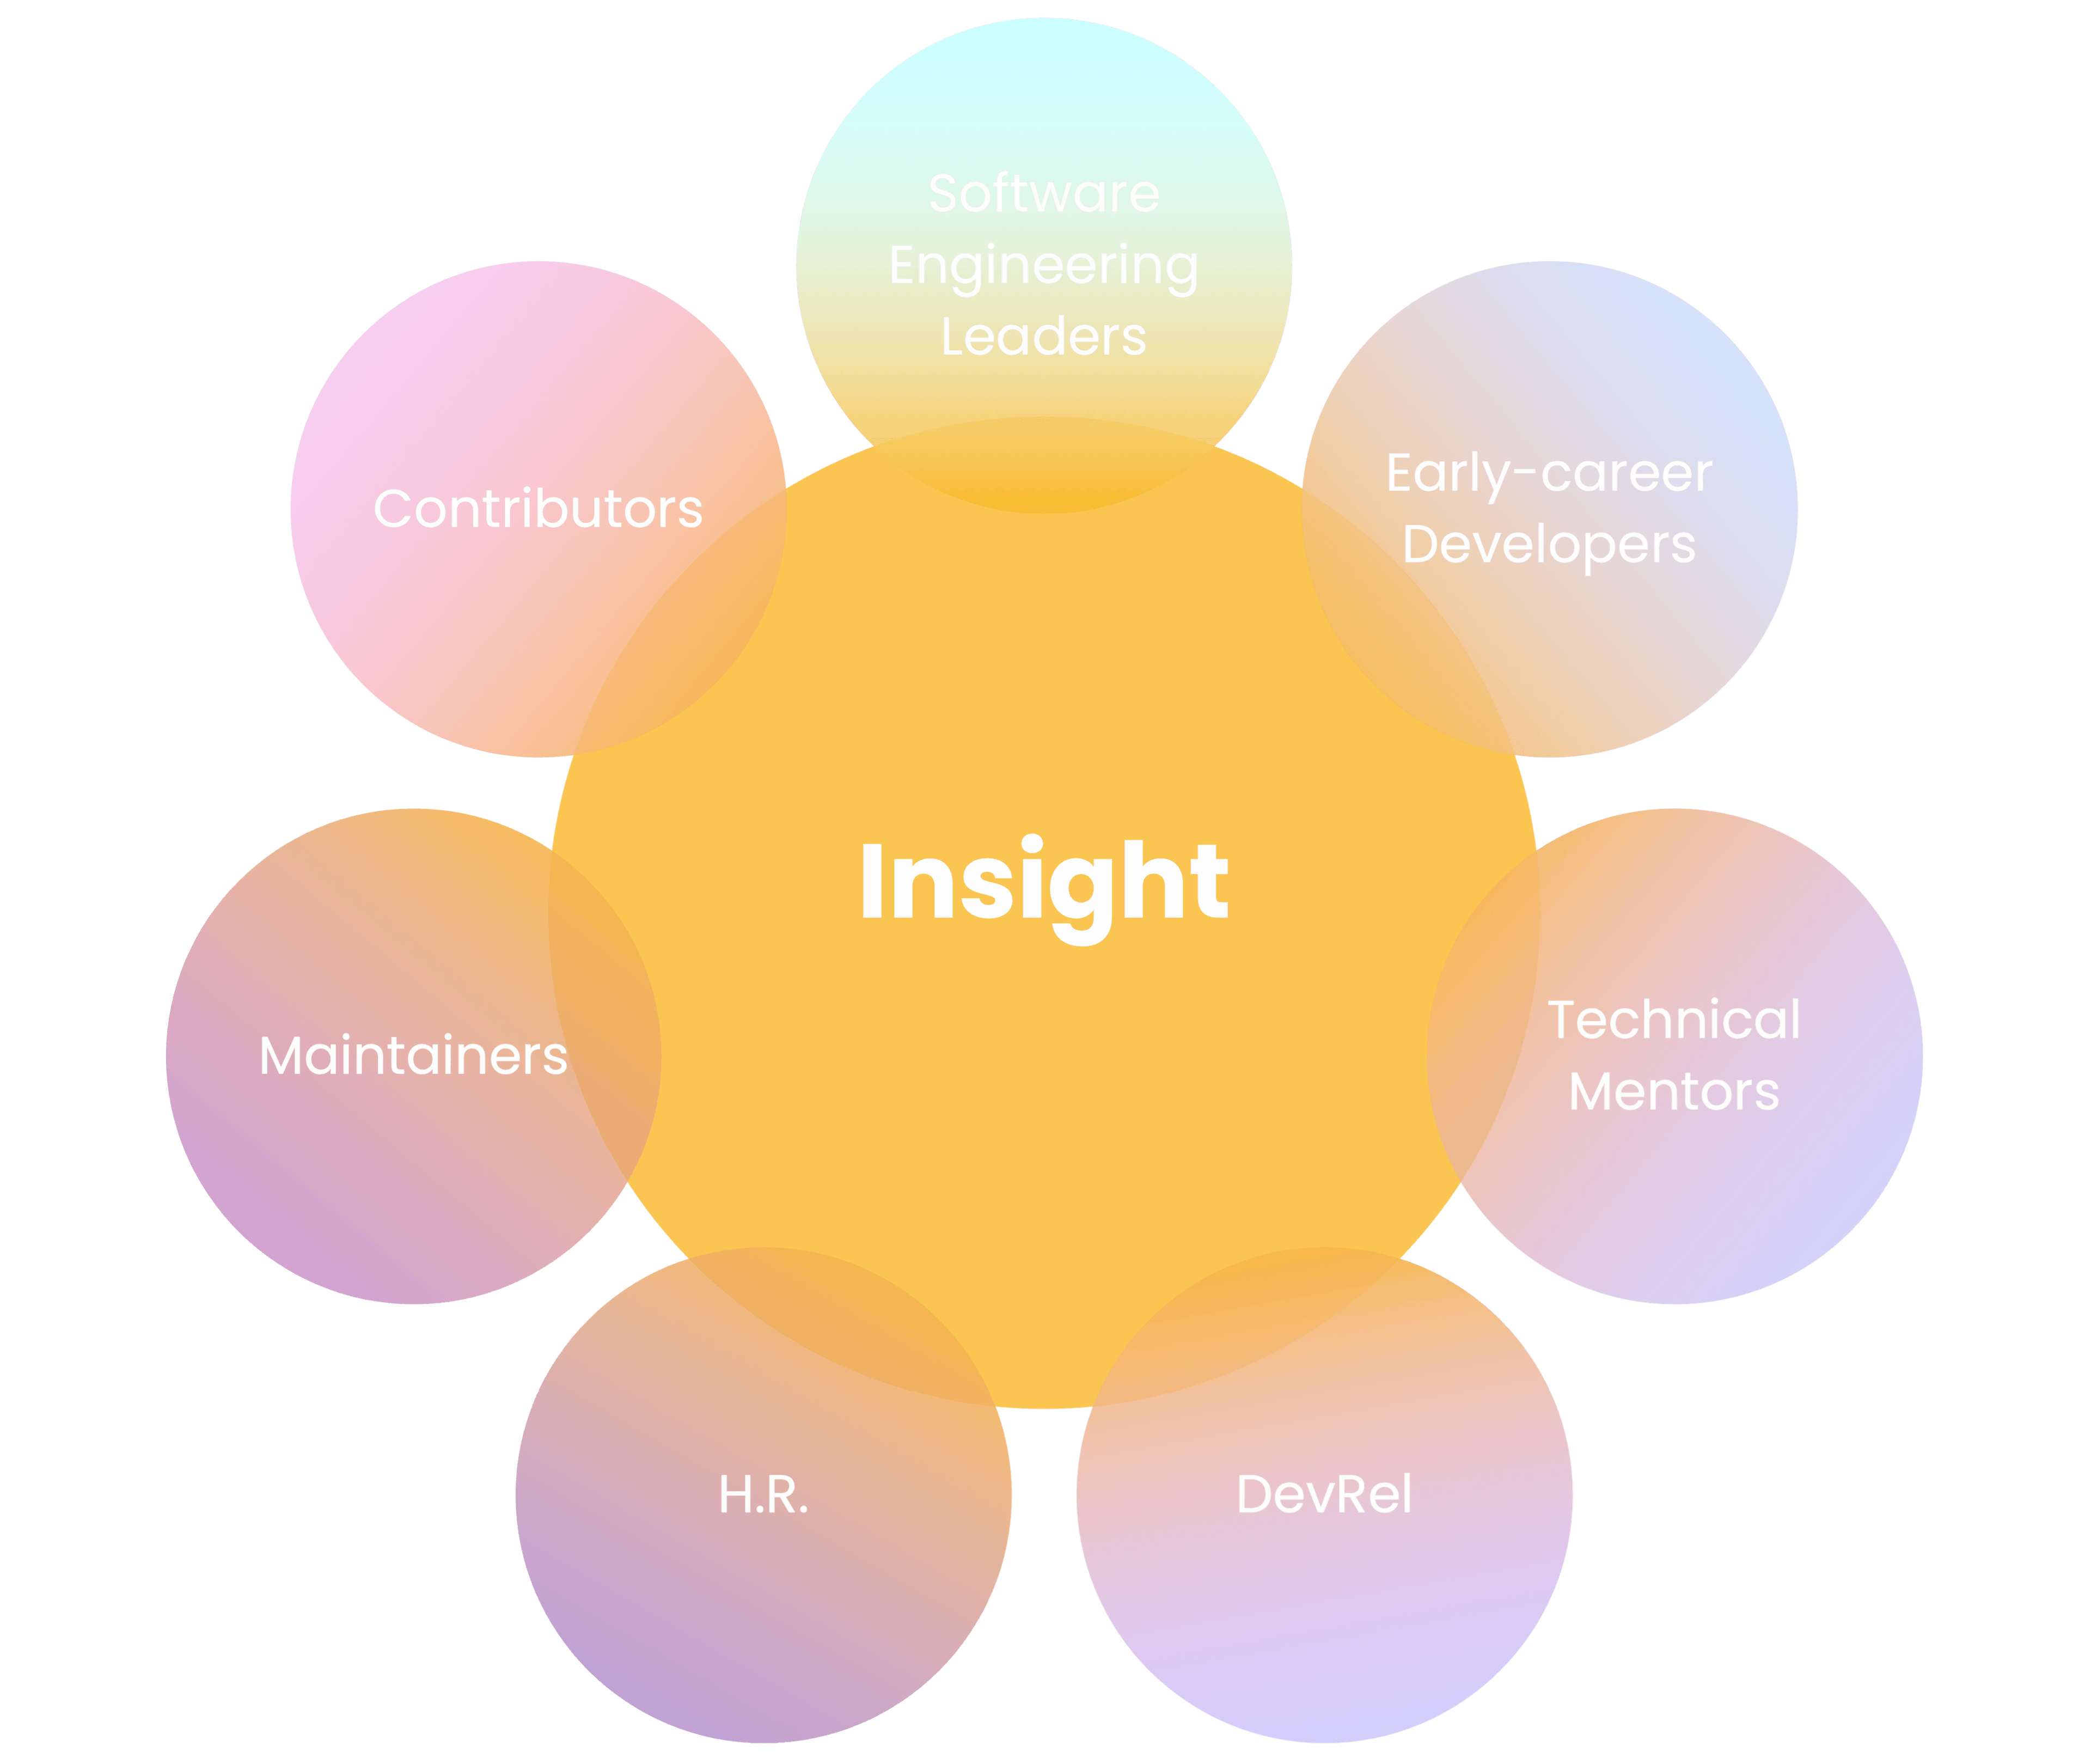 Insight MLH Offers As A Nexus of Several Communities